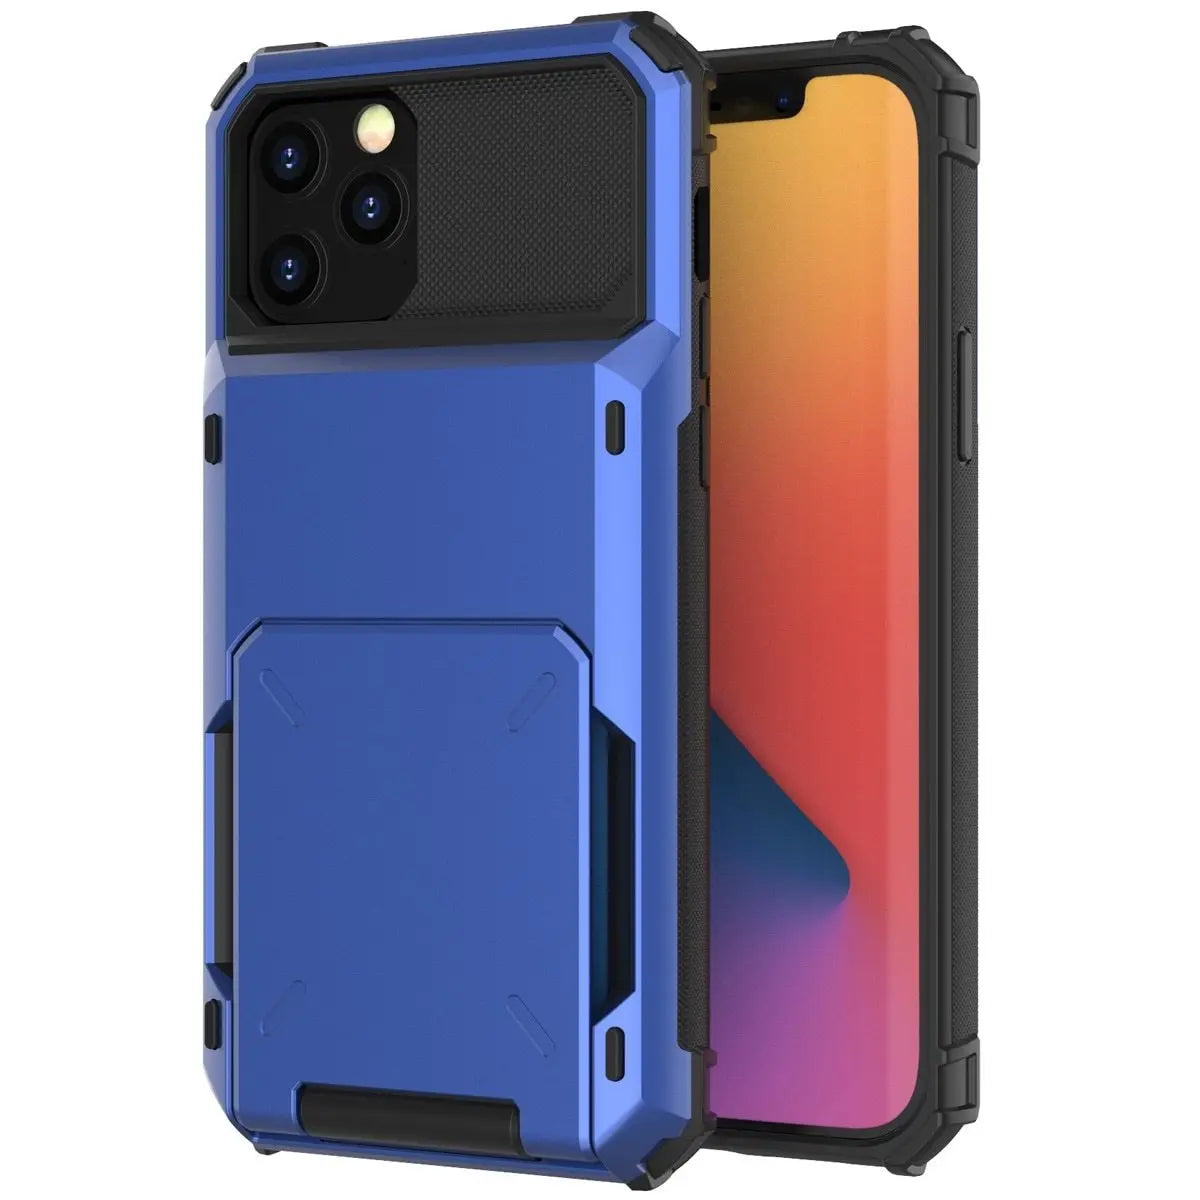 Orbit Shockproof iPhone Wallet Case For X, 11, 12 & 13 Series phone case iphone
Samsung cases
OnePlus cases
Huawei cases